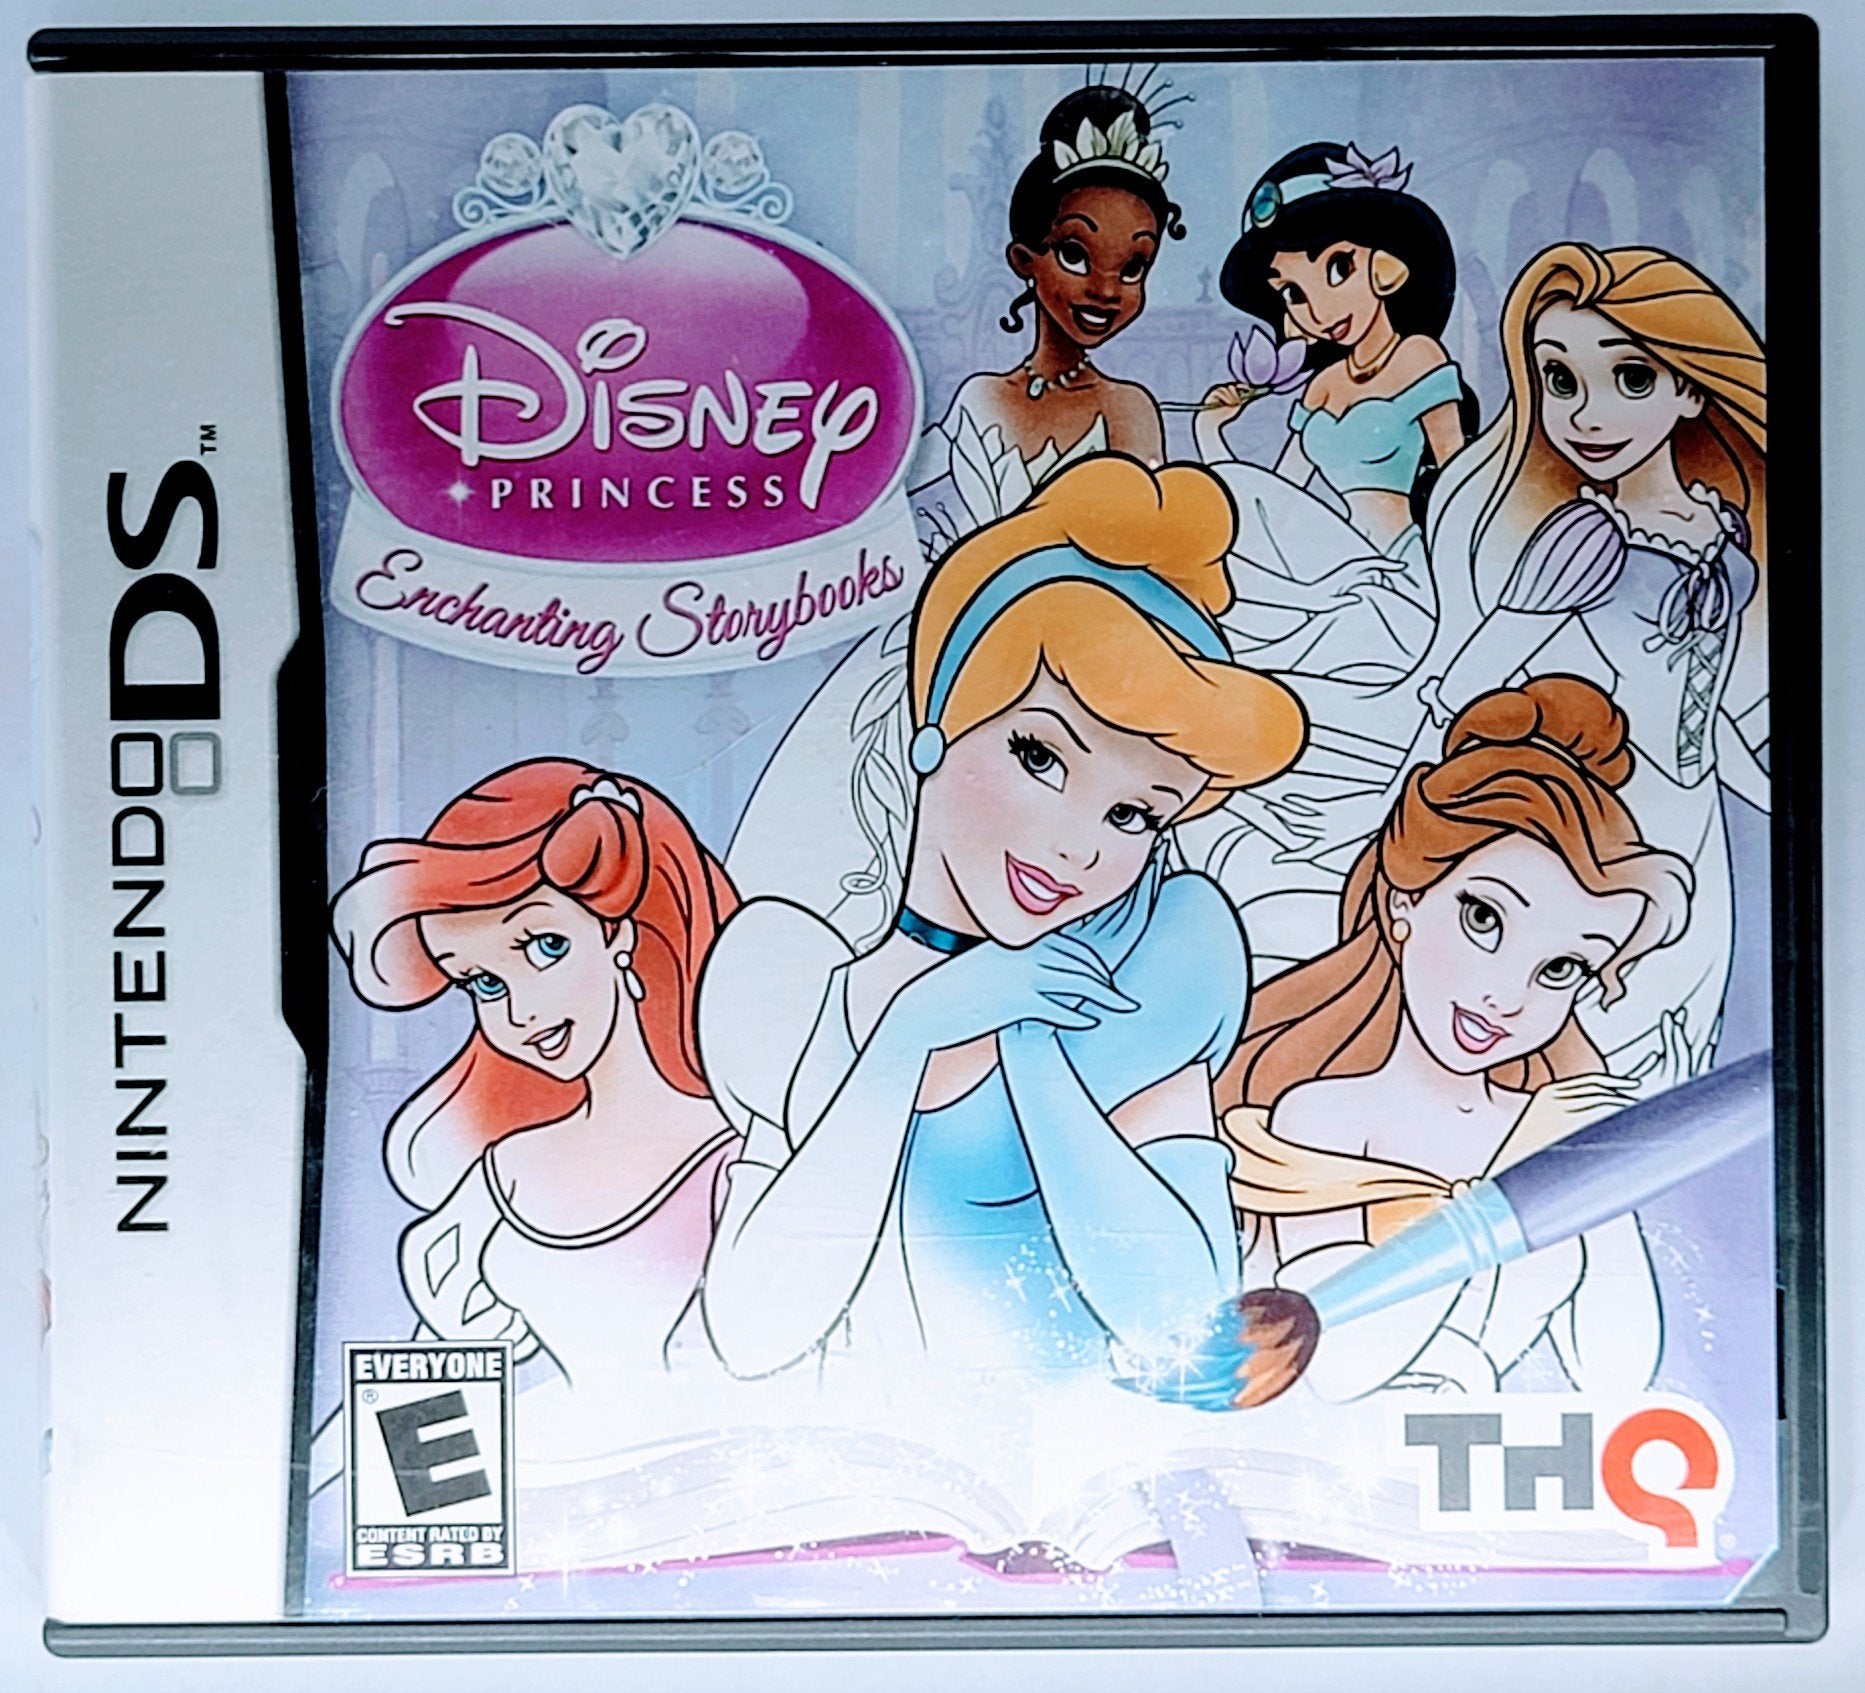 Disney Princess: Enchanting Storybooks Nintendo DS Game: Enter a World of Fairytales!  Xclusive Collectibles   